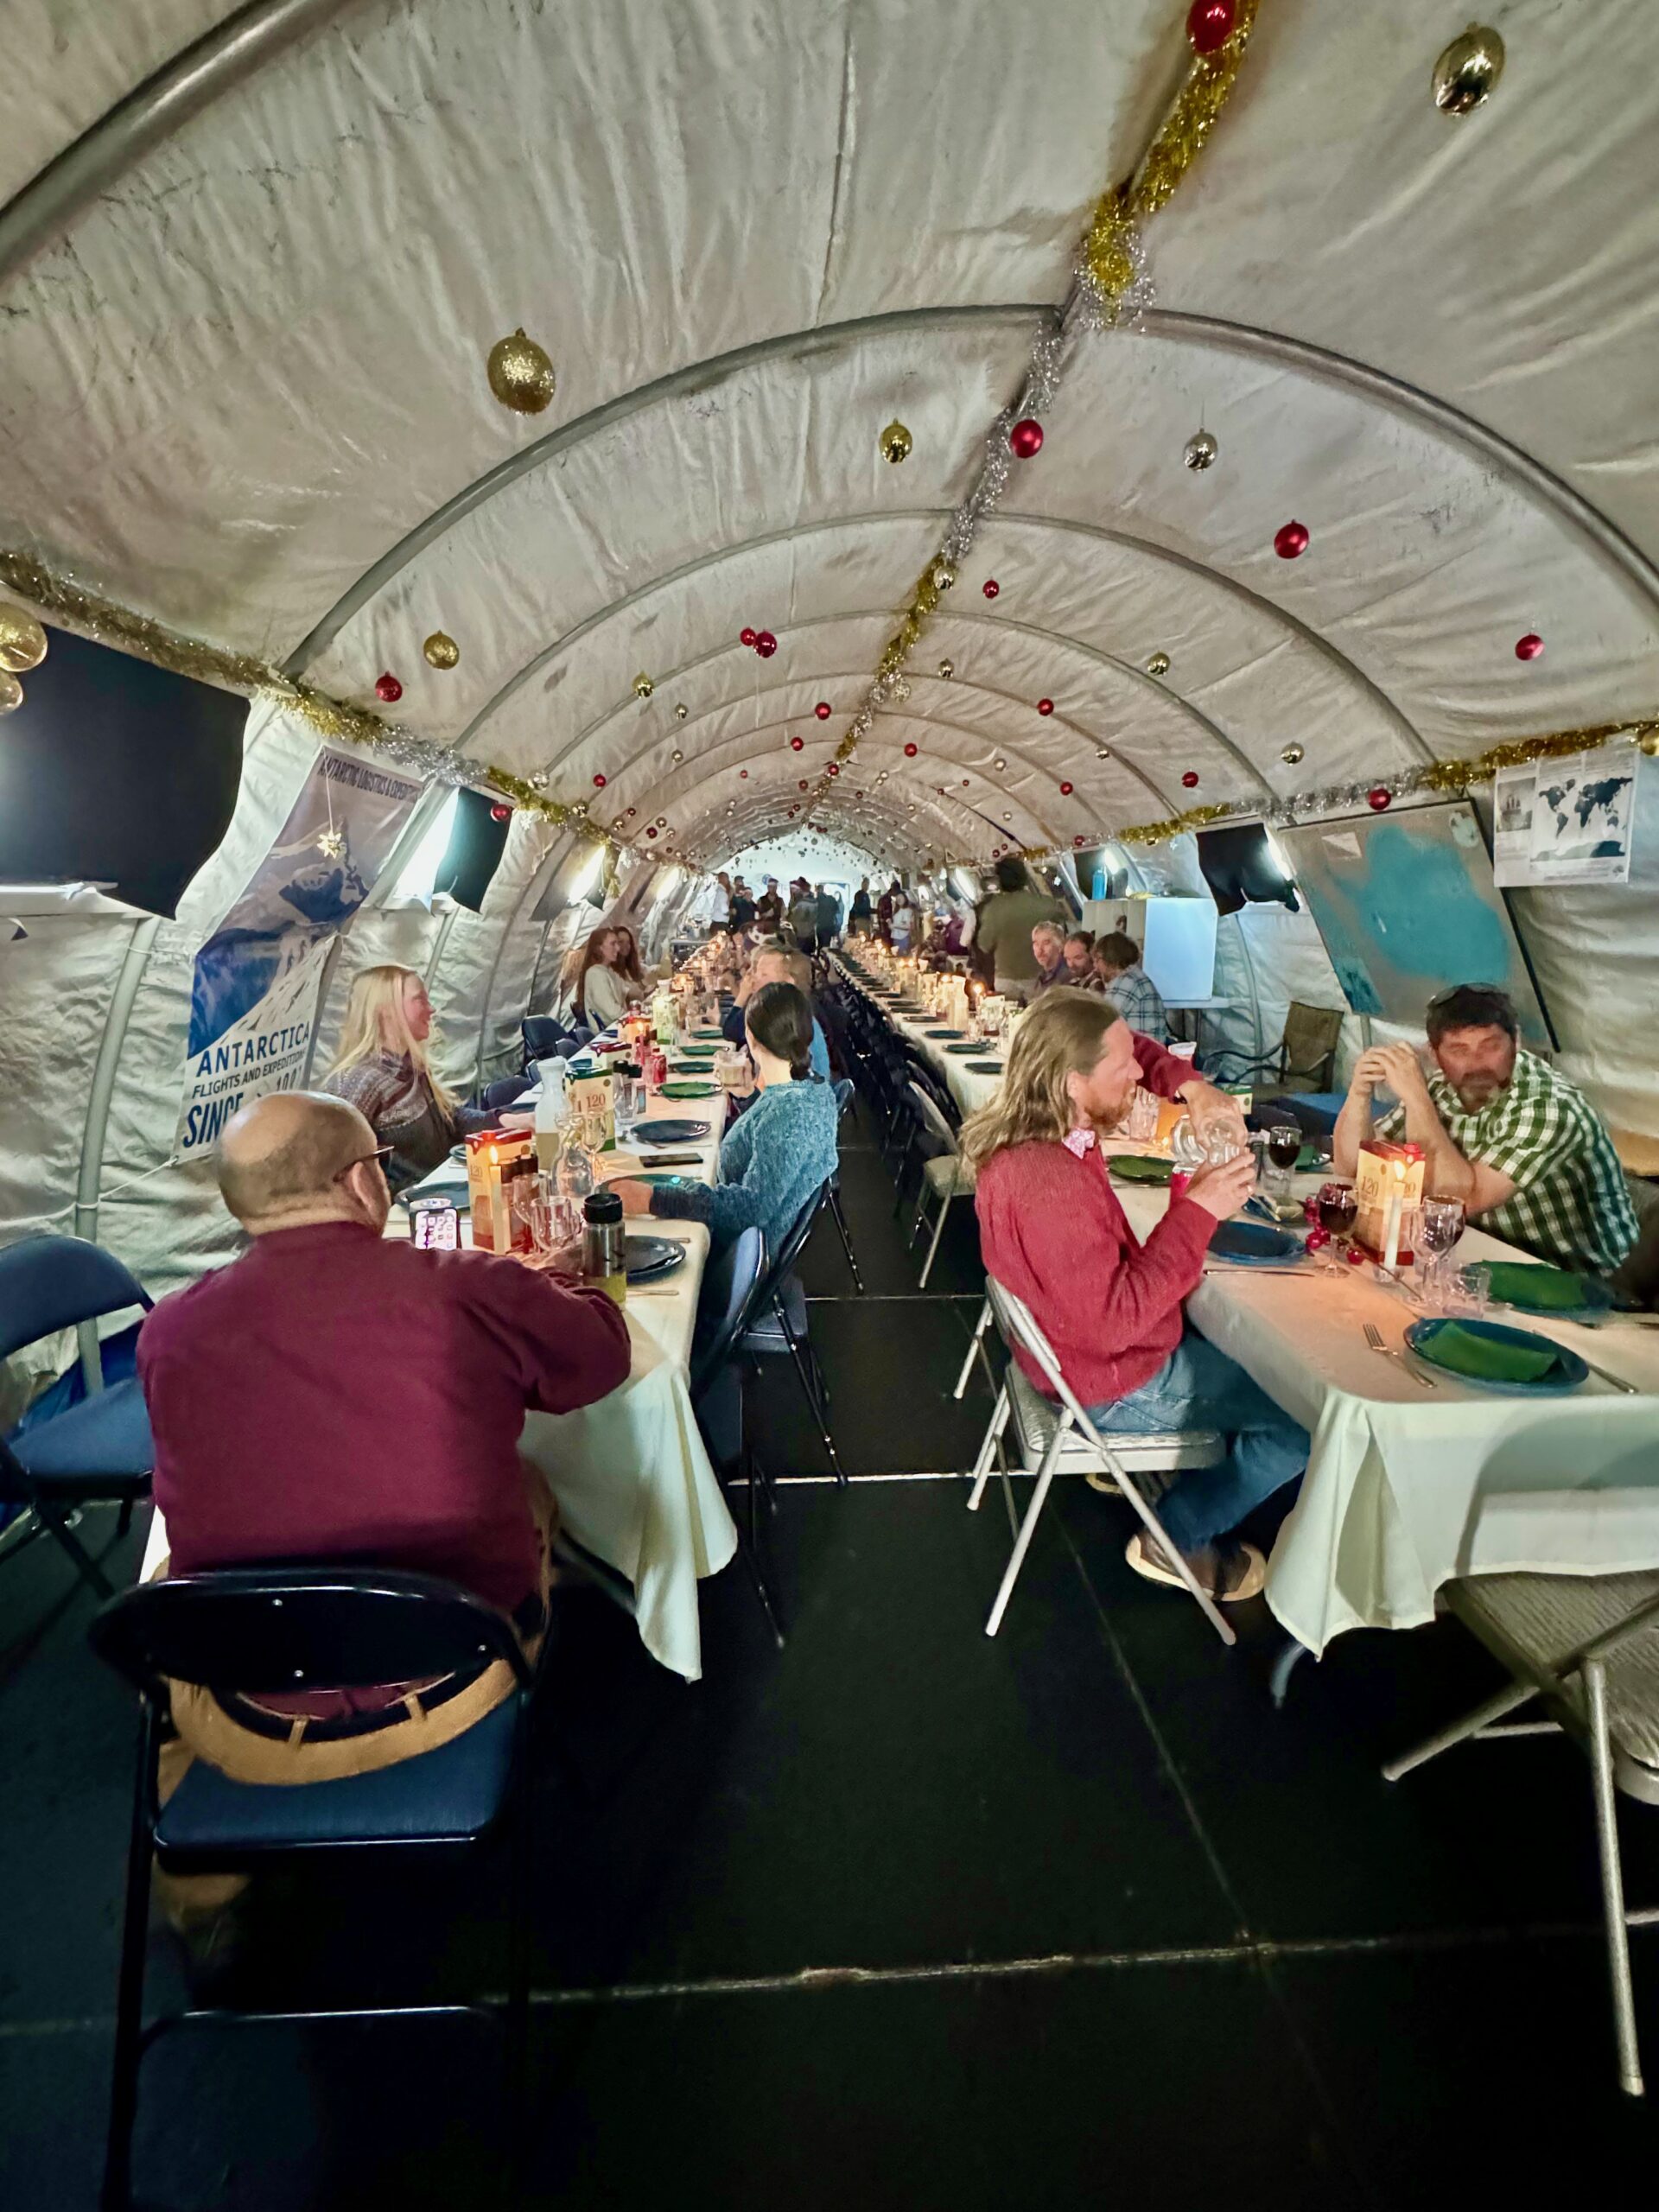 People sitting at two long tables in a tent with holiday decorations.